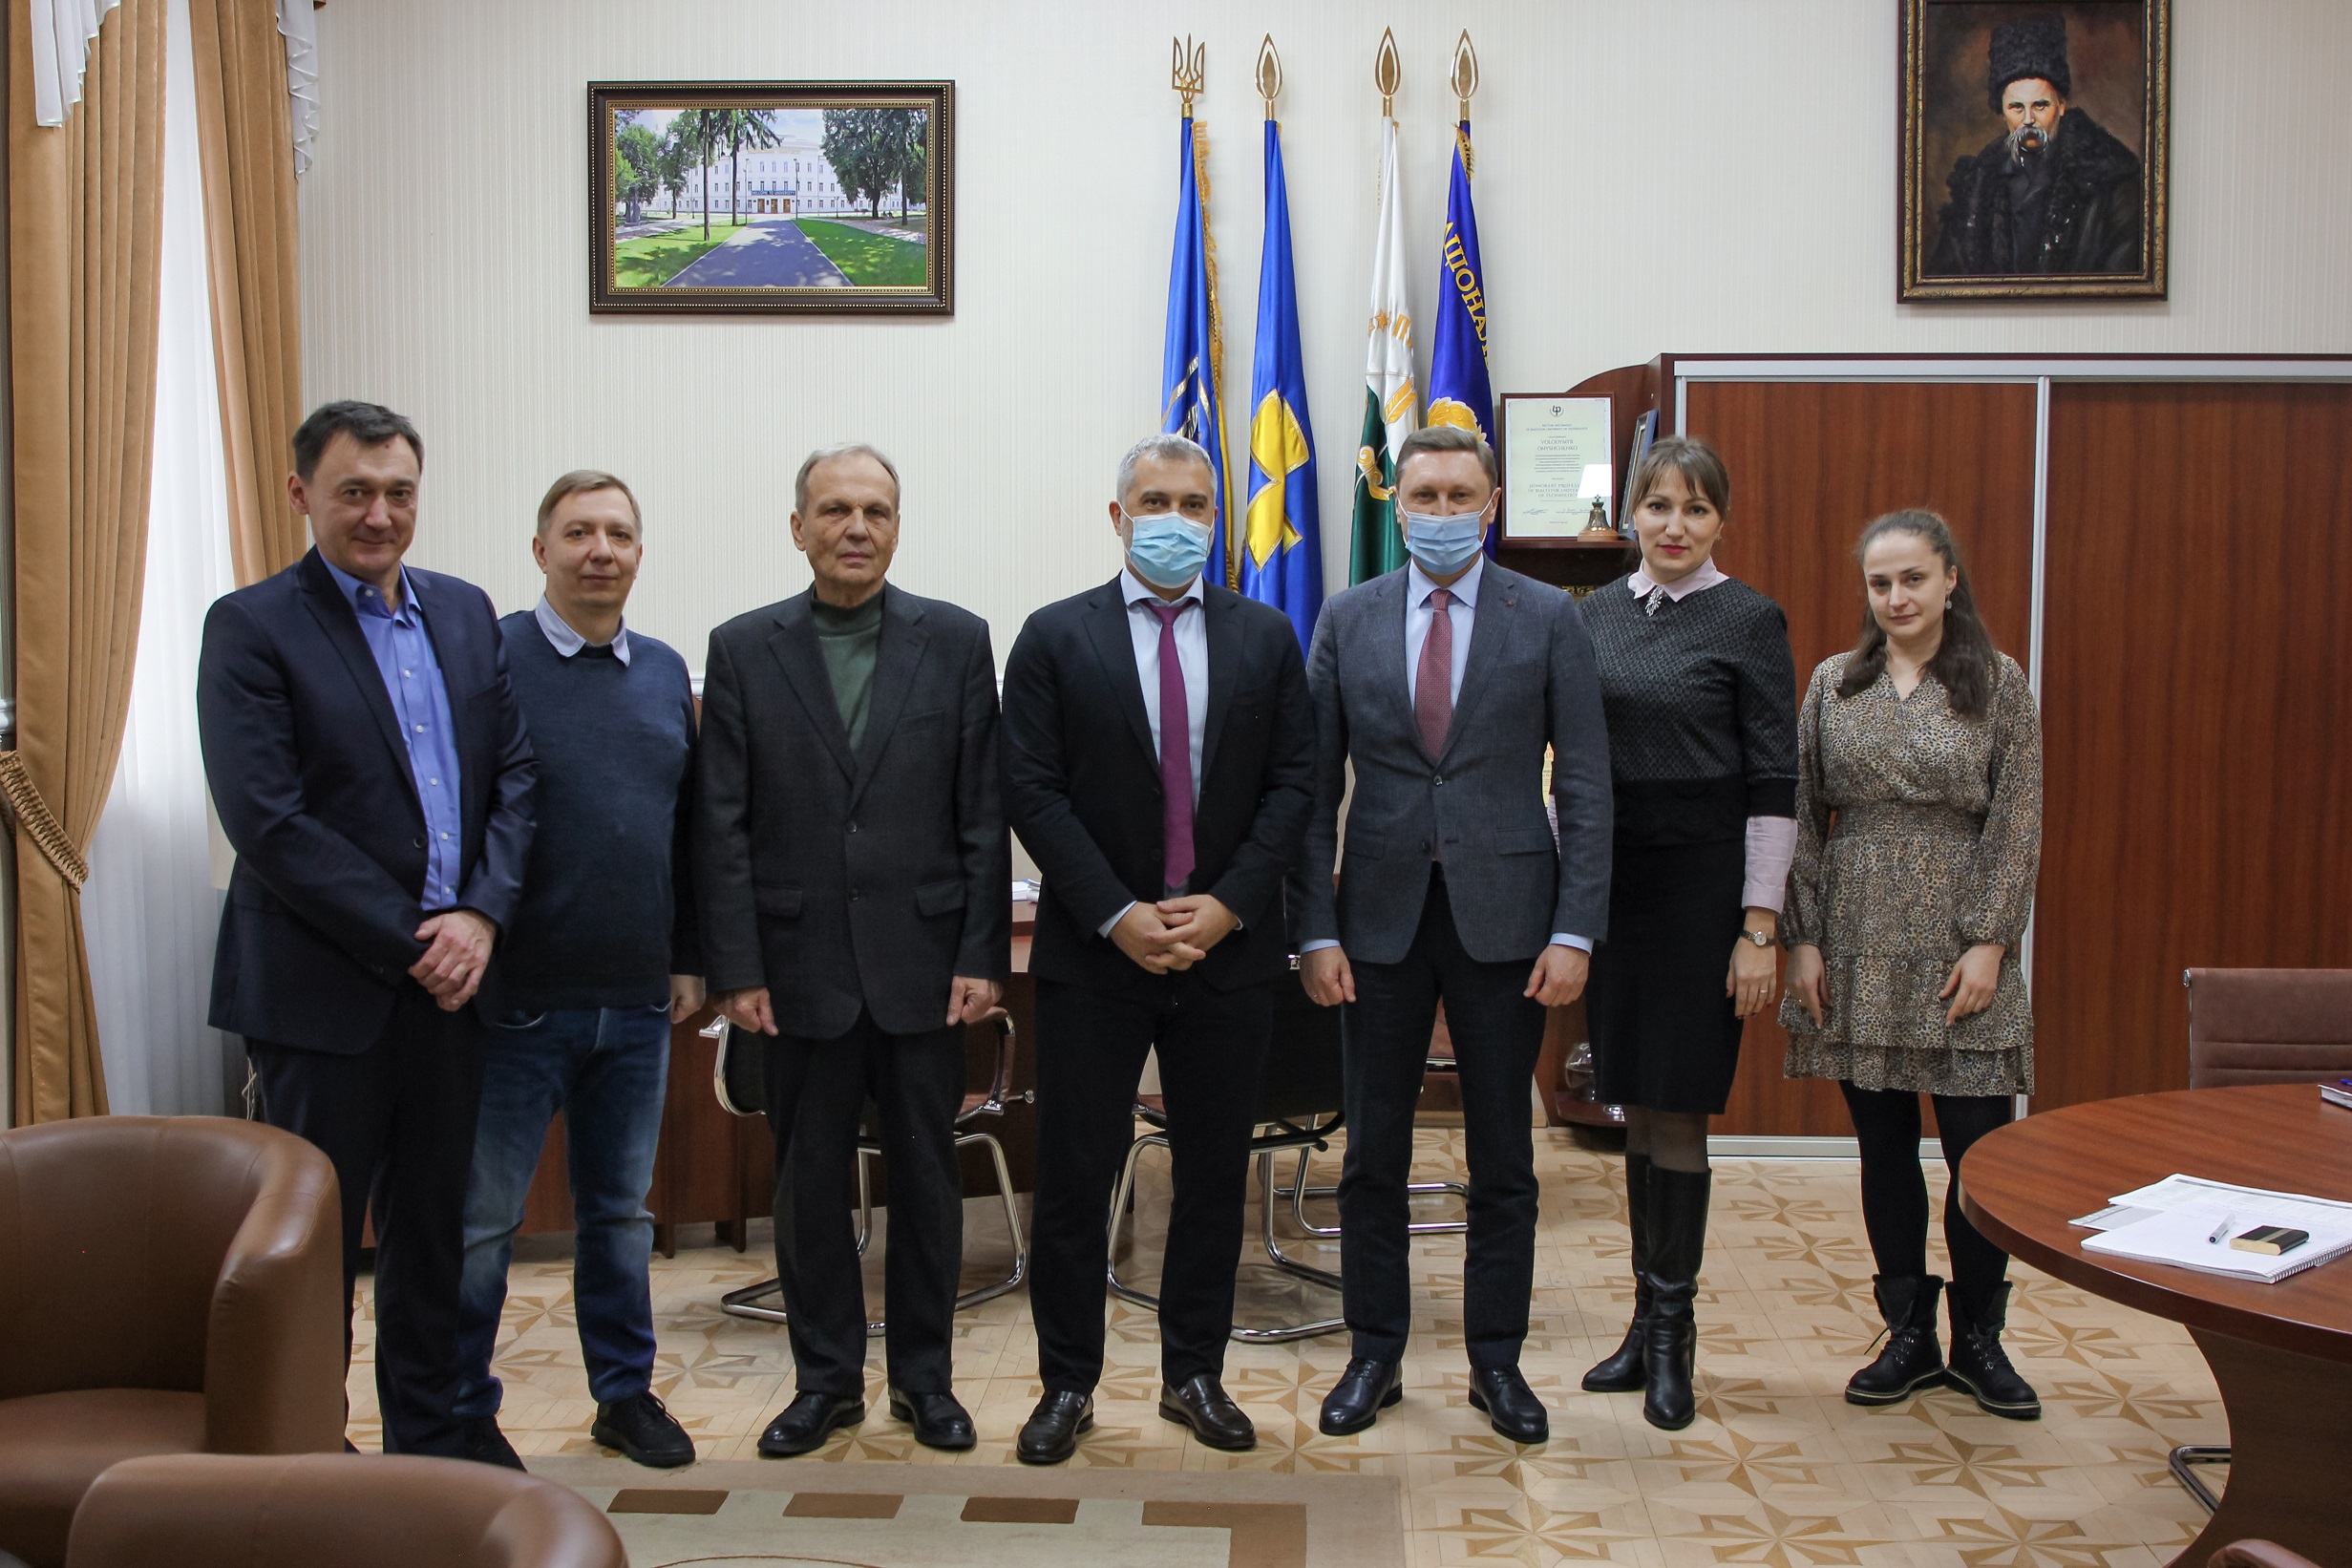 The delegation of representatives of the European Investment Bank visited the University